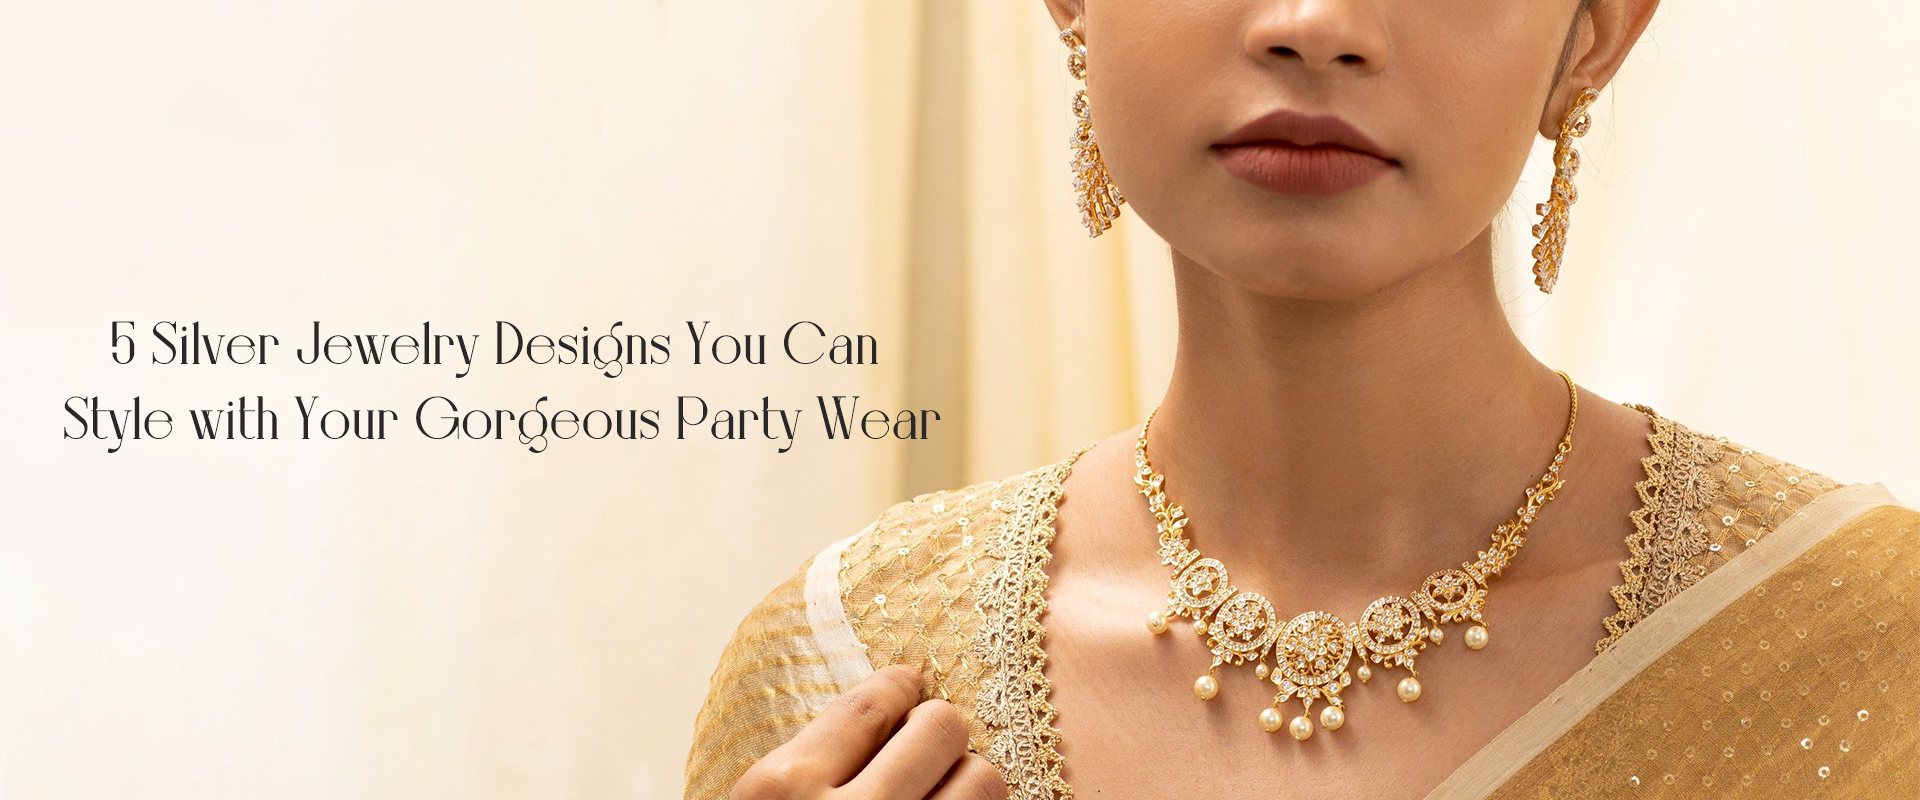 5 Silver Jewelry Designs You Can Style with Your Gorgeous Party Wear